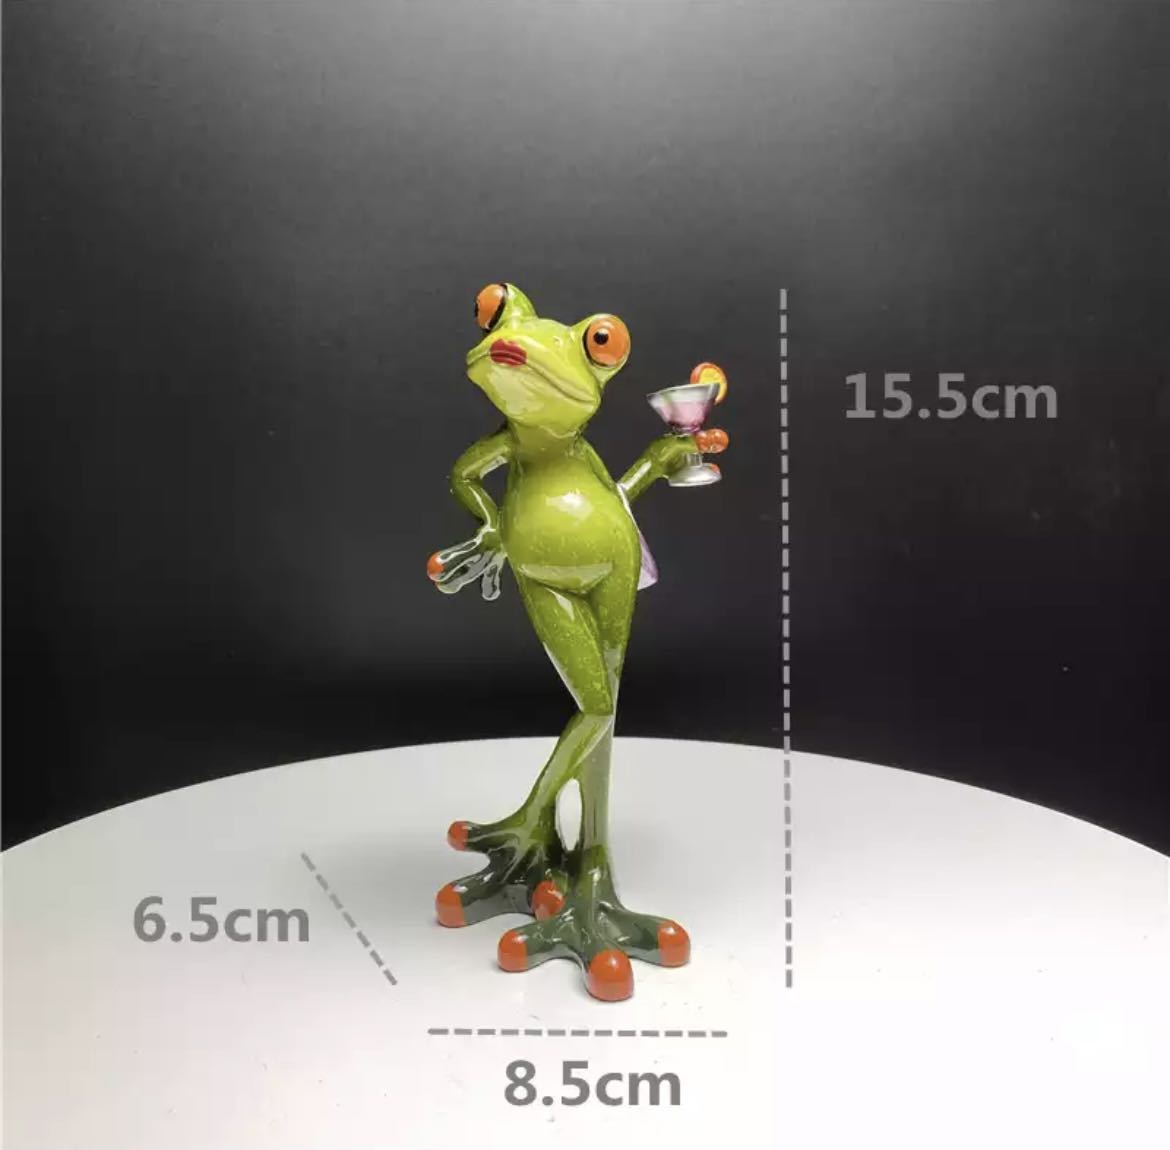 Frog figurine resin frog figure ornament interior goods figurine small item goods unique cute decoration cocktail 1560, Handmade items, interior, miscellaneous goods, ornament, object